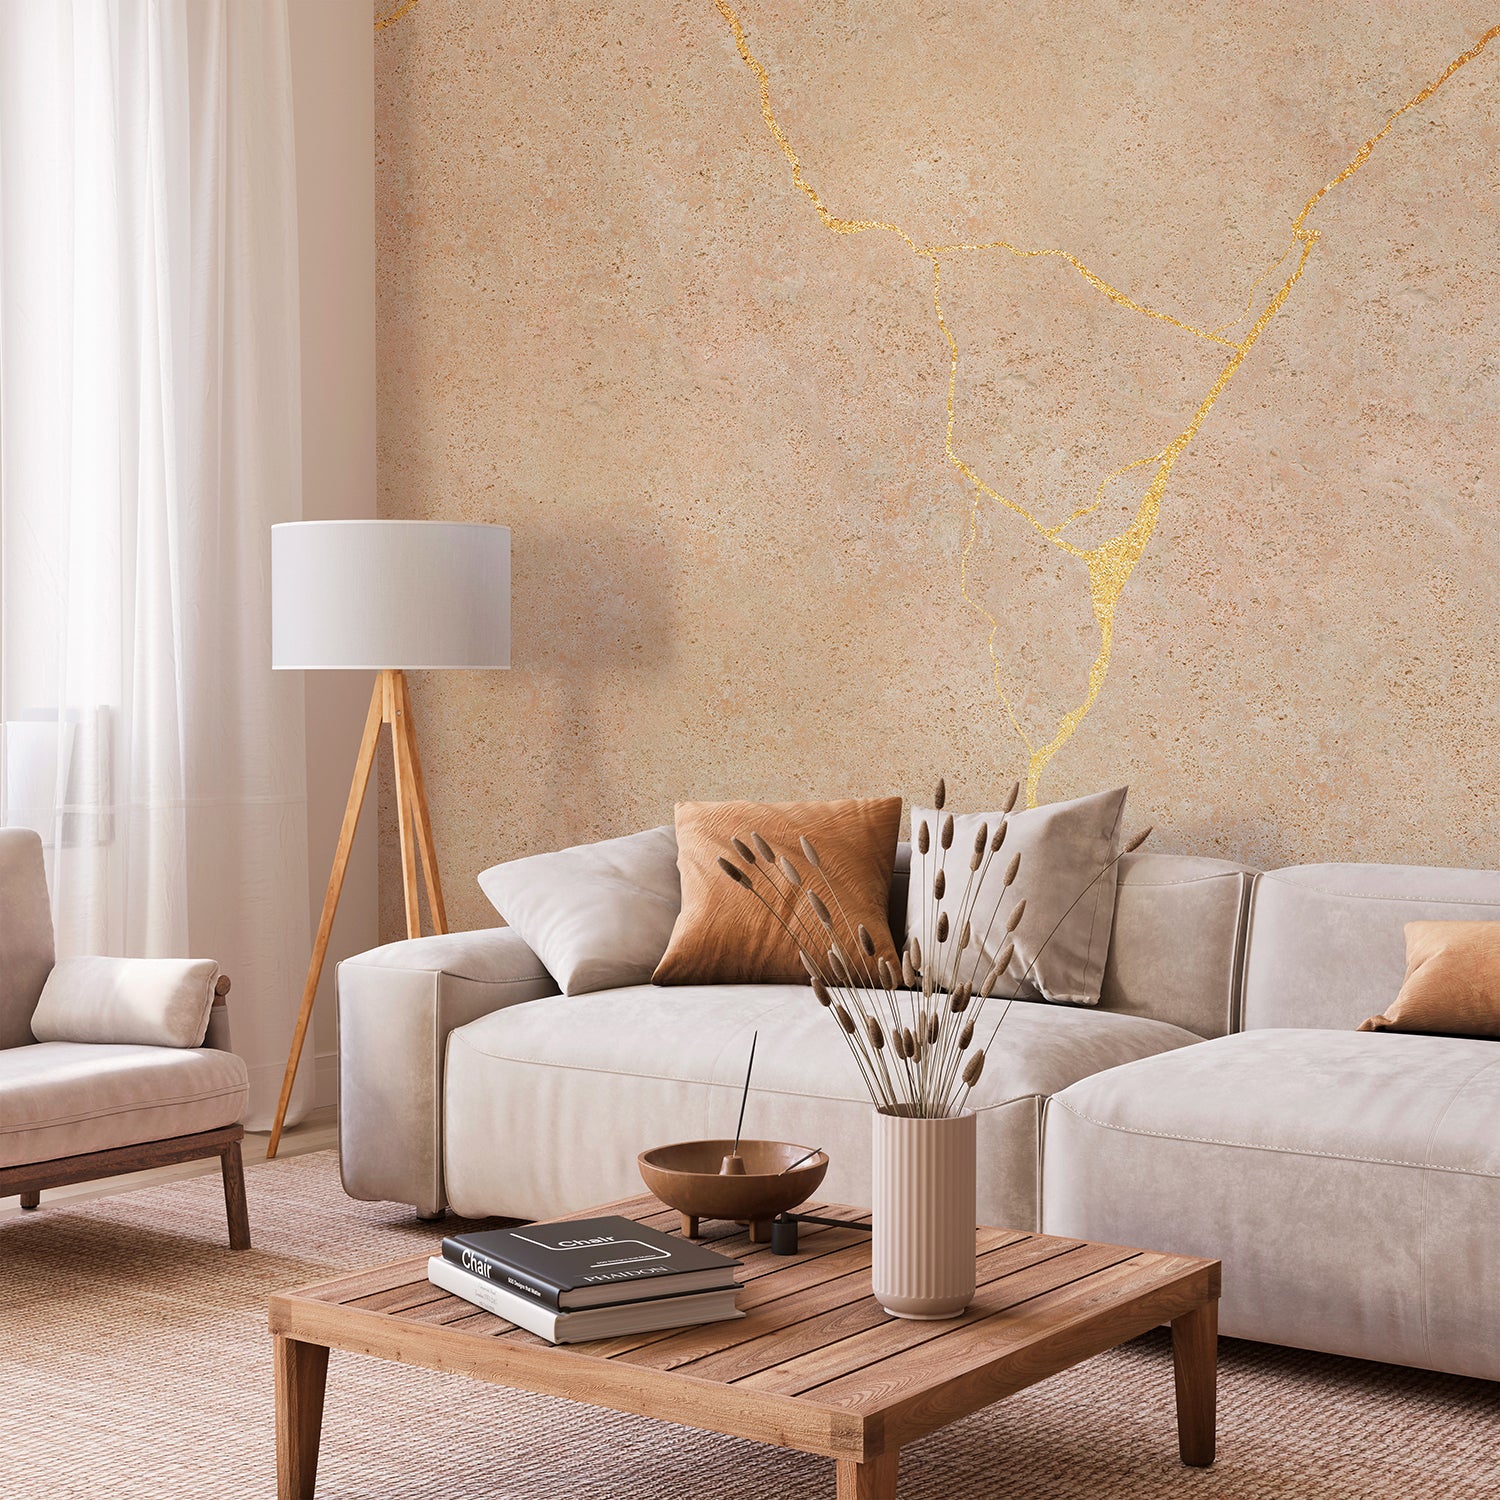 Kintsuguroi Japanese, Mural Wallpaper in a cozy living room with a white and brown color scheme, in it is this seating area stands an elegant wooden tripod lampshade, which casts its warm glow over the entire space.